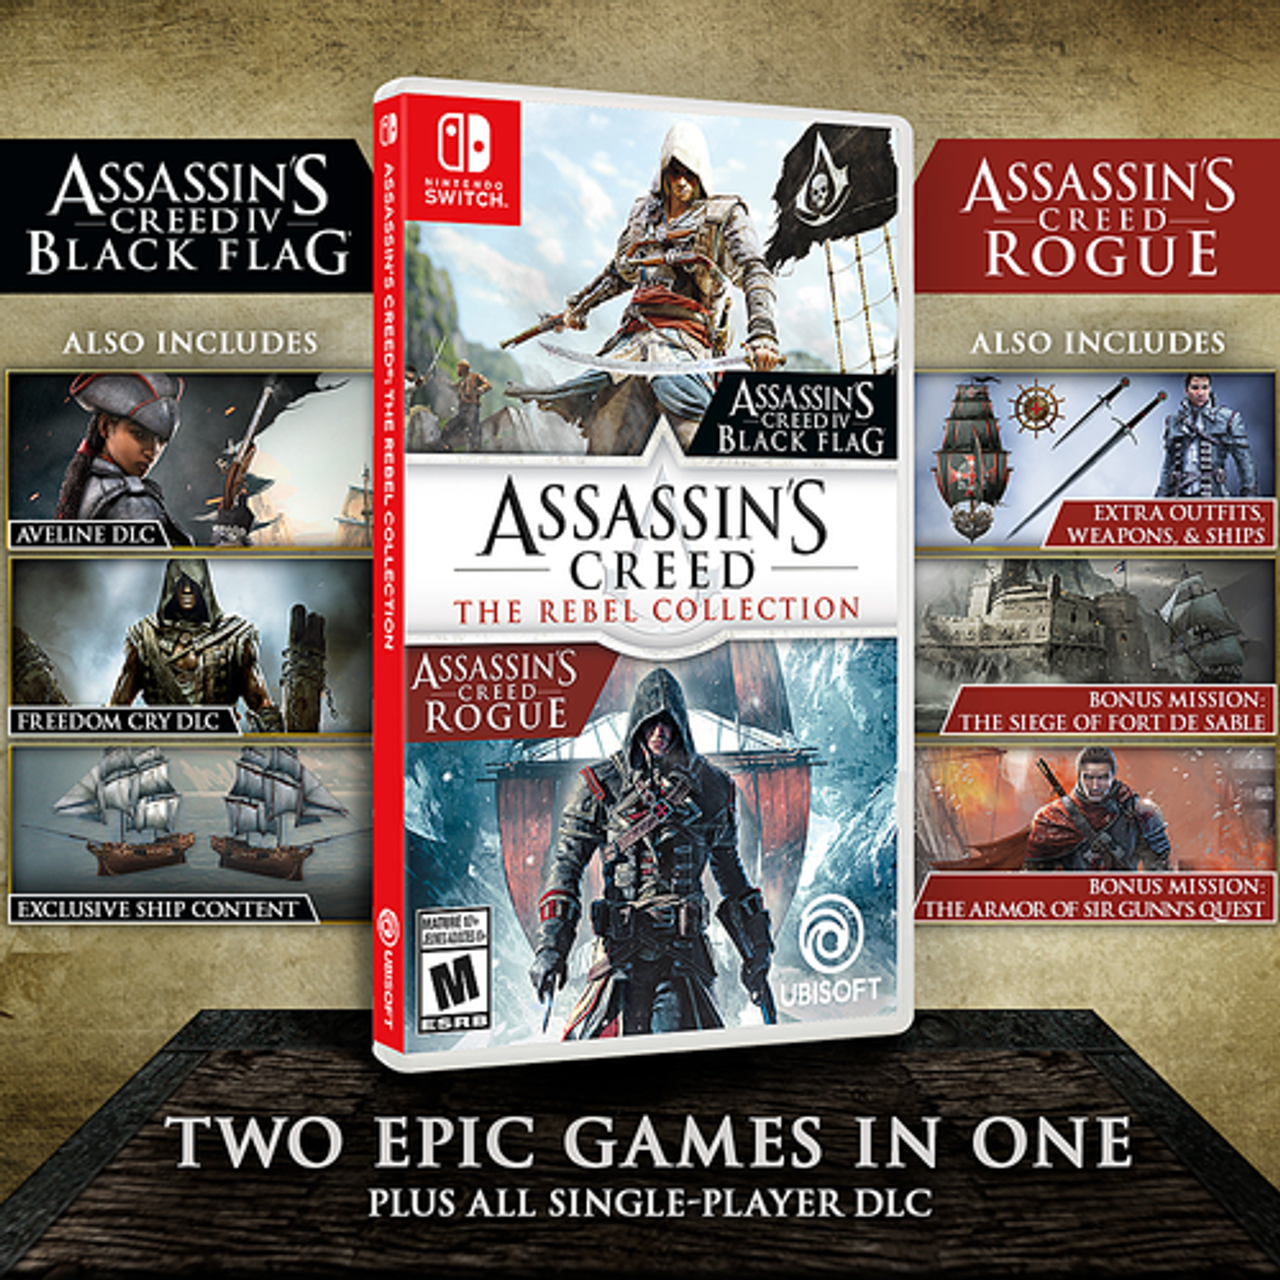 Assassin's Creed: The Rebel Collection - Code in Box - Nintendo Switch, Nintendo Switch (OLED Model), Nintendo Switch Lite